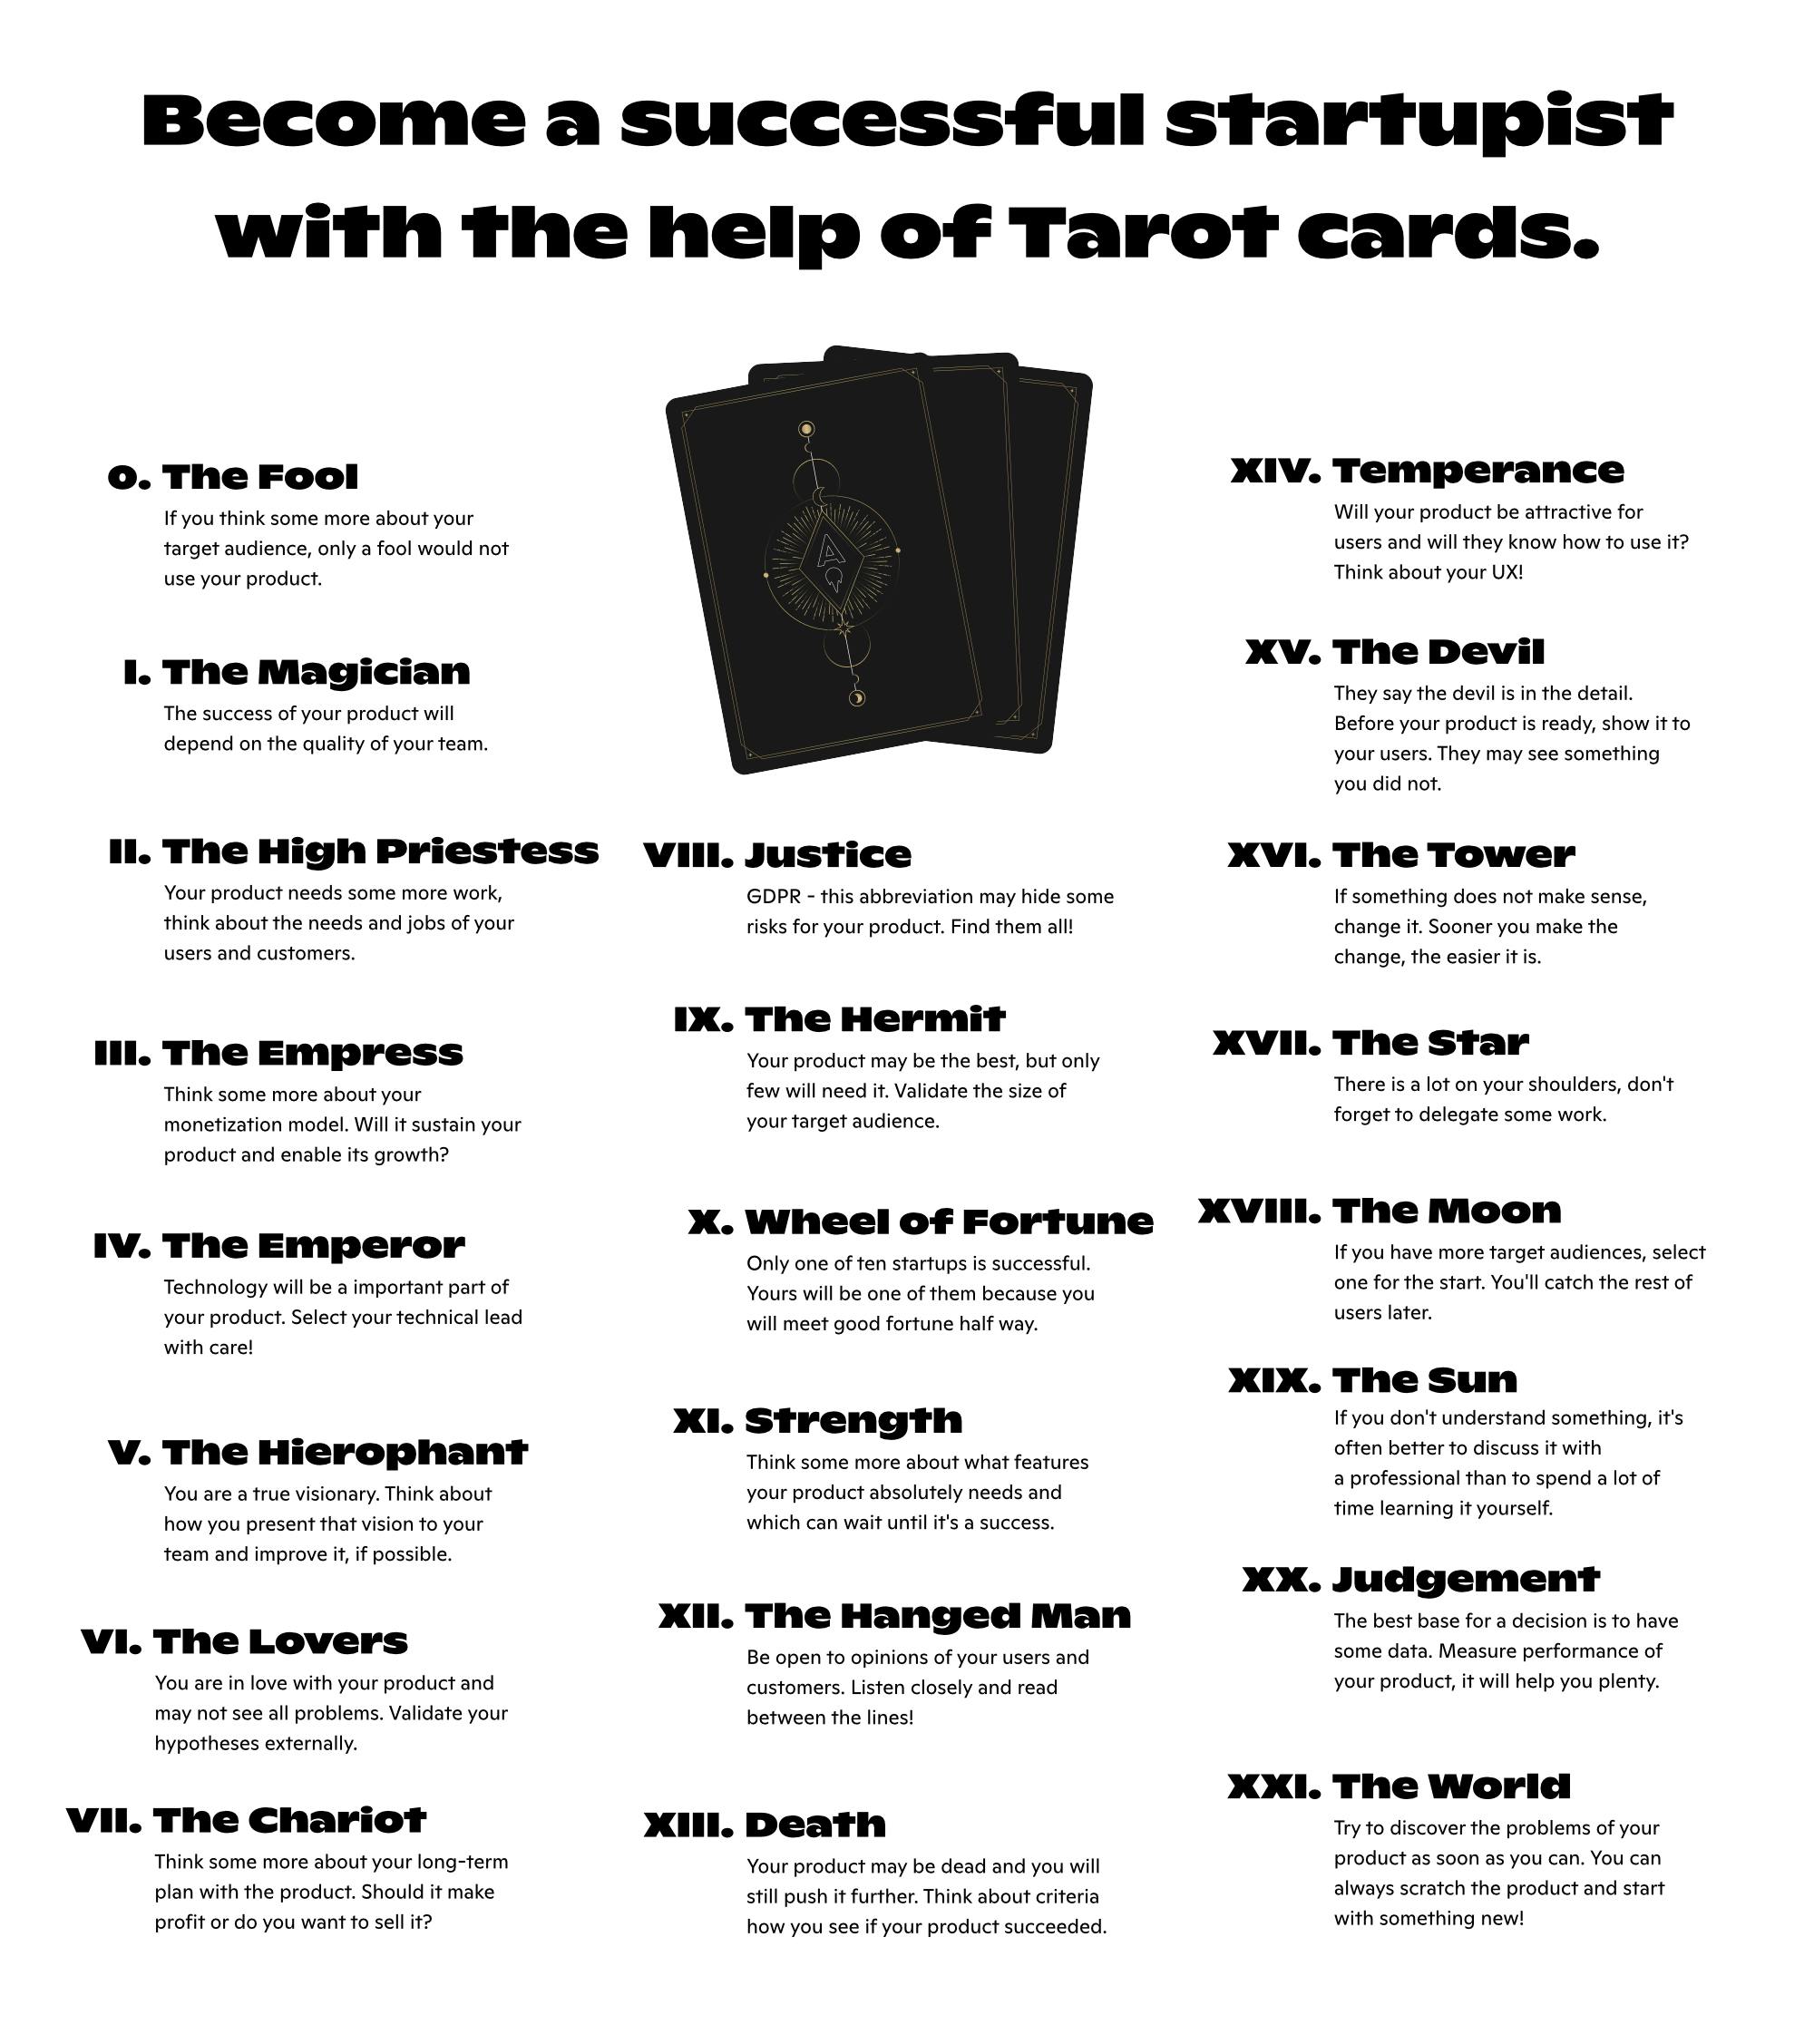 Shuffle the deck of tator cards and place them on the table one at a time. Read each new card's interpretation and muse about it. Continue until you have laid out the entire deck. 